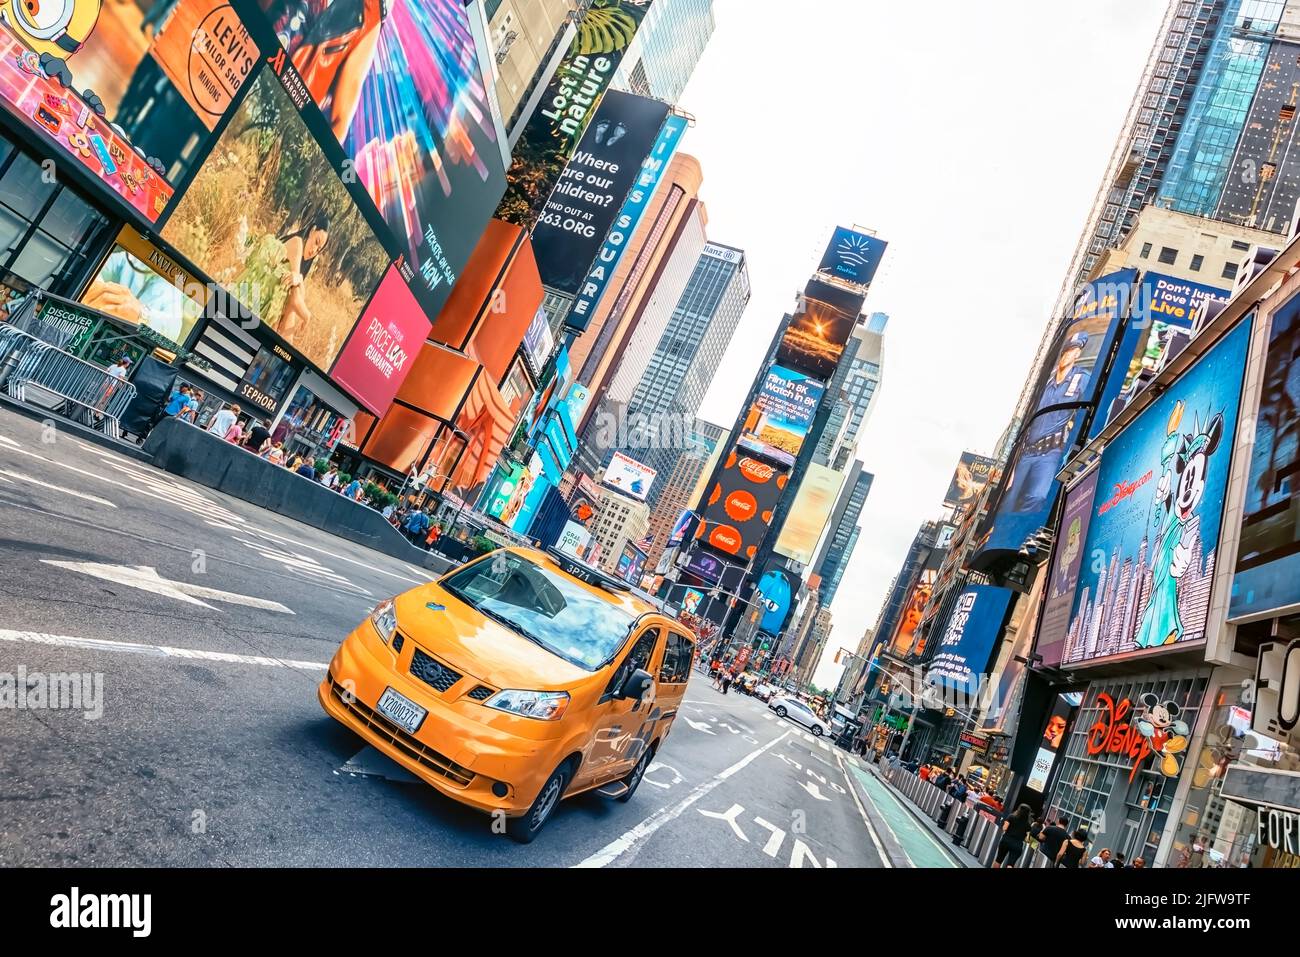 Times Square, the major commercial intersection in Midtown Manhattan, New York. Stock Photo